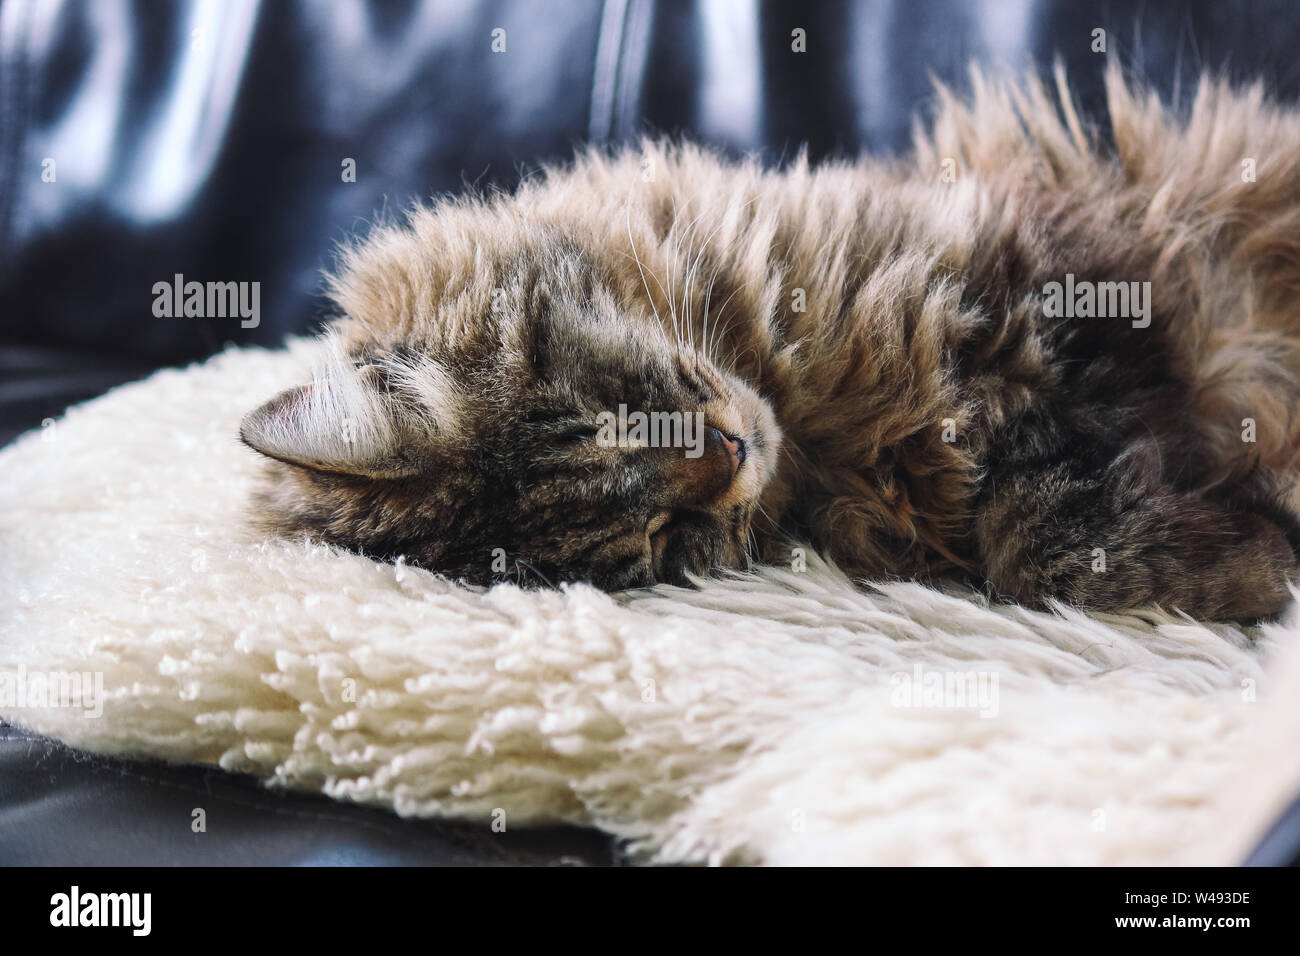 Beautiful cat sleeps. Tabby grey cat lying, taking a nap on white fluffy blanket. Cute, innocent pet. Concept, conceptual. Tired animals, sleeping animals. Stock Photo